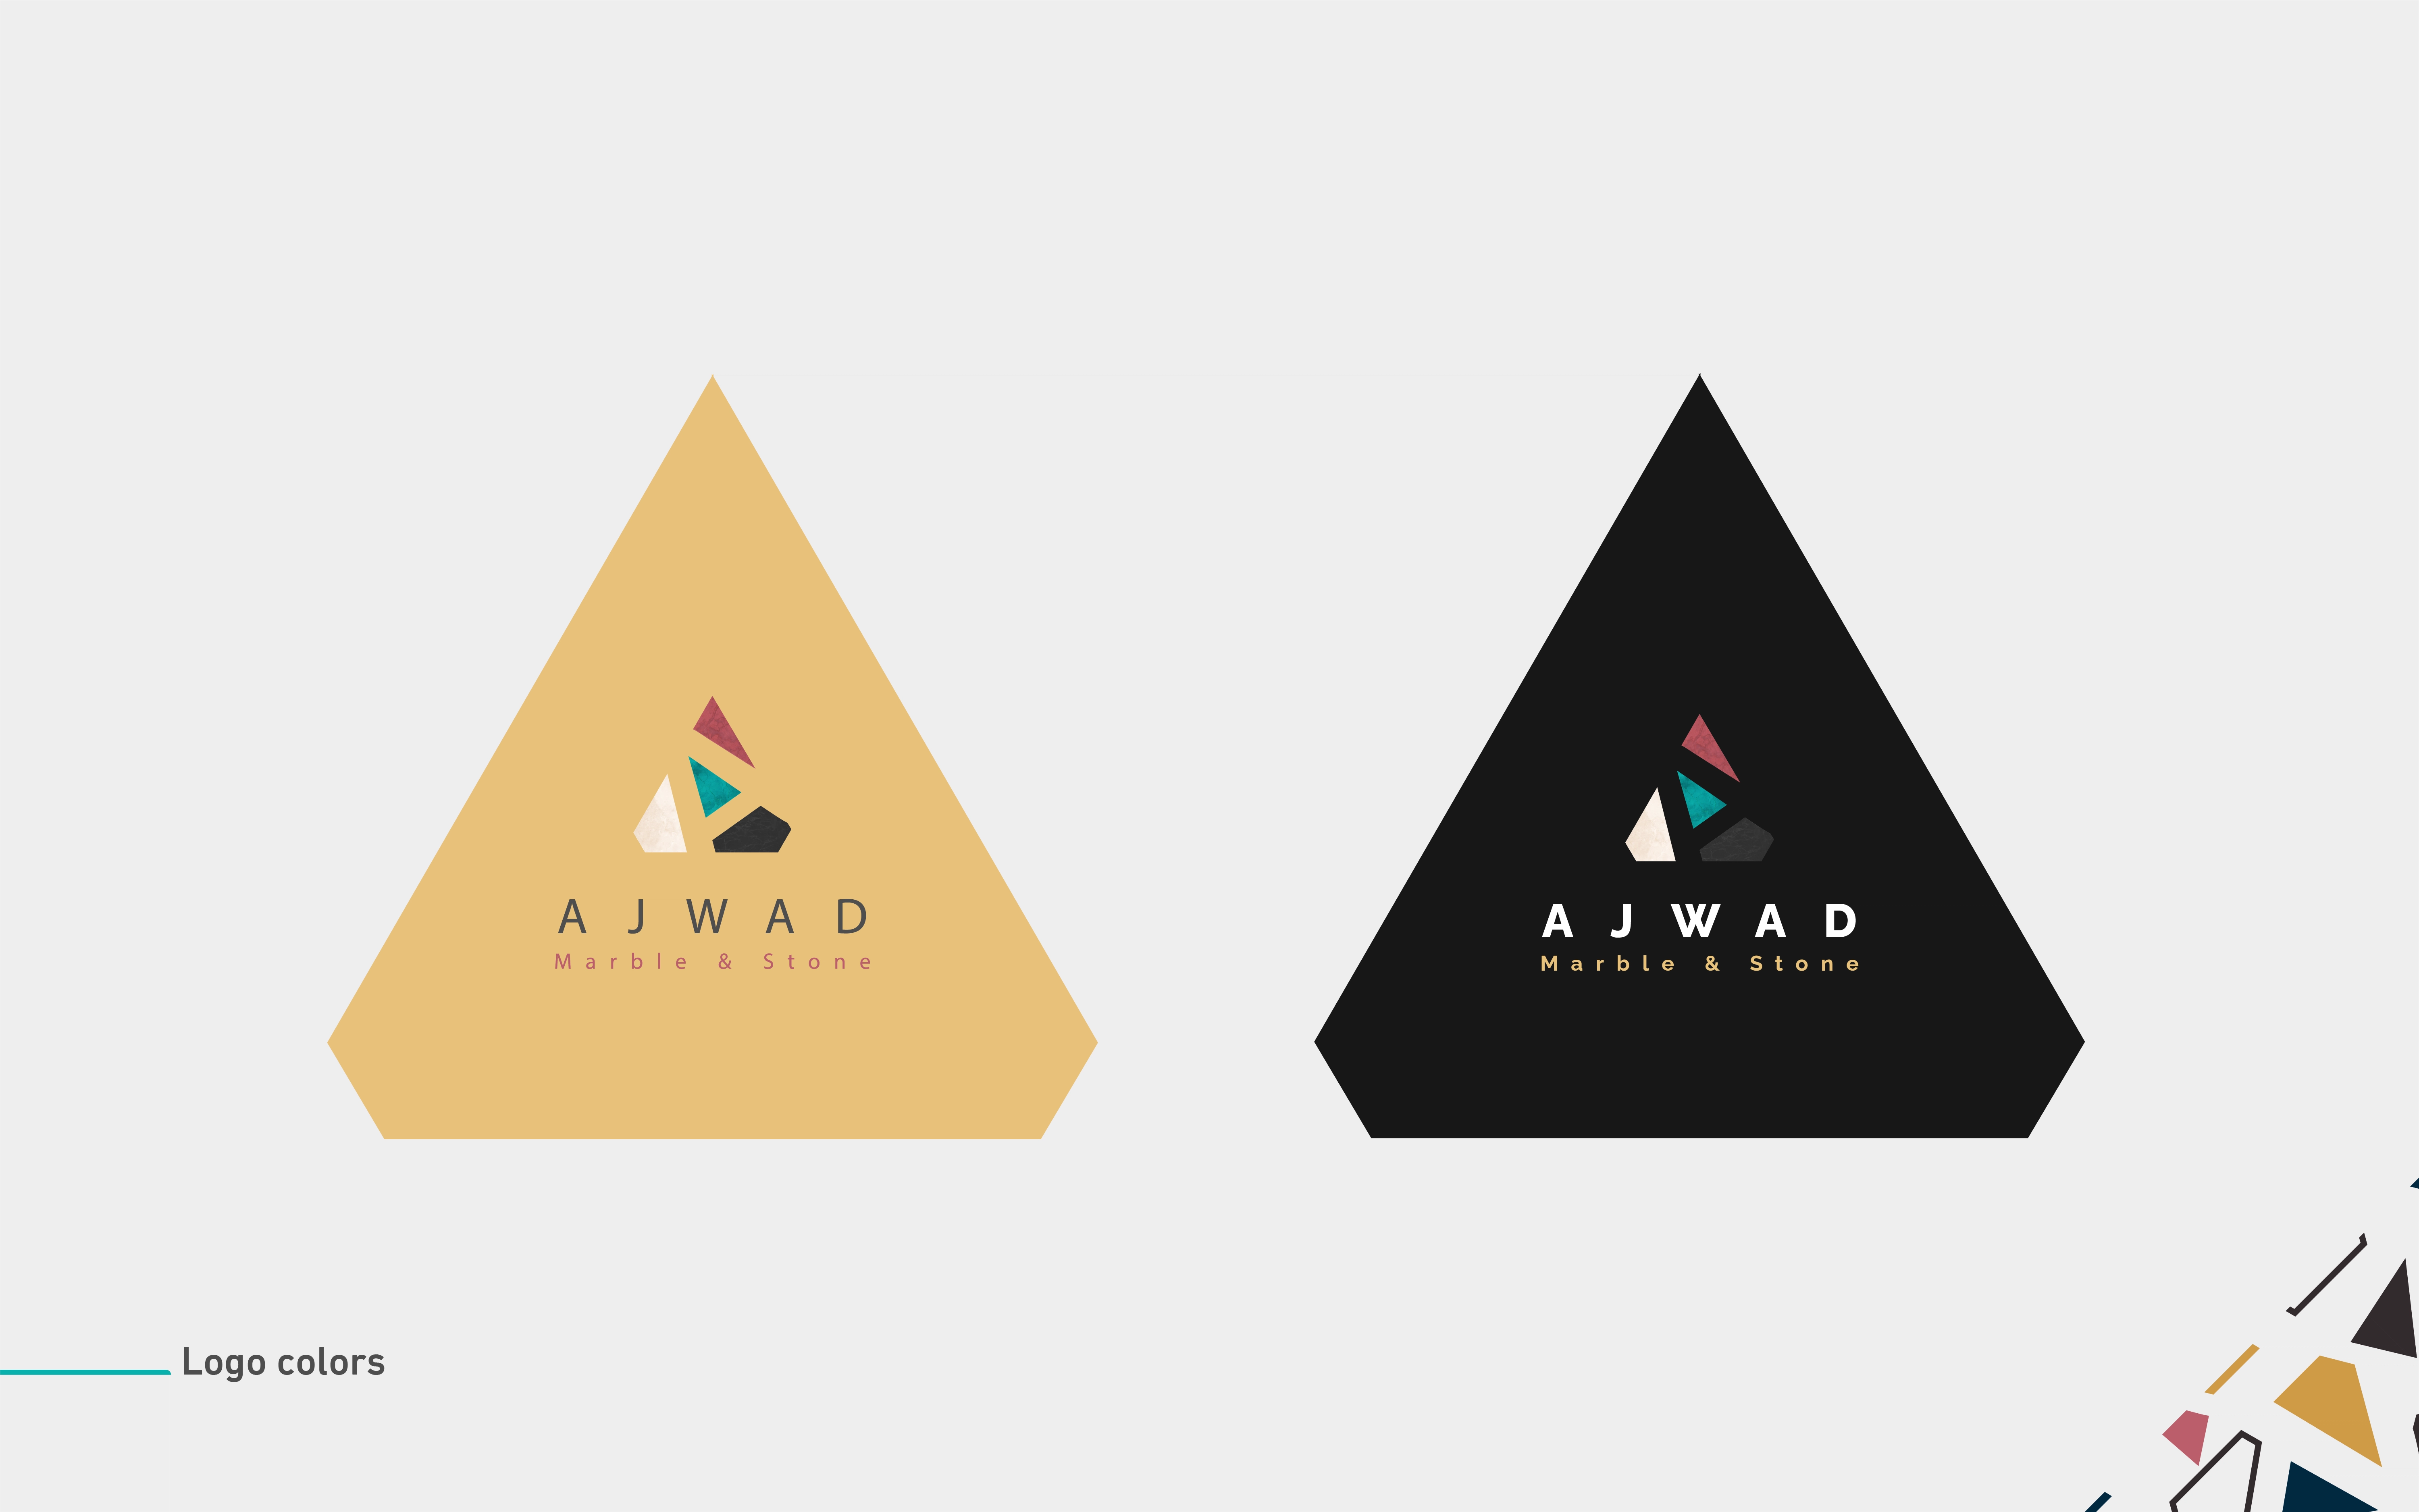 Ajwad for marble industry